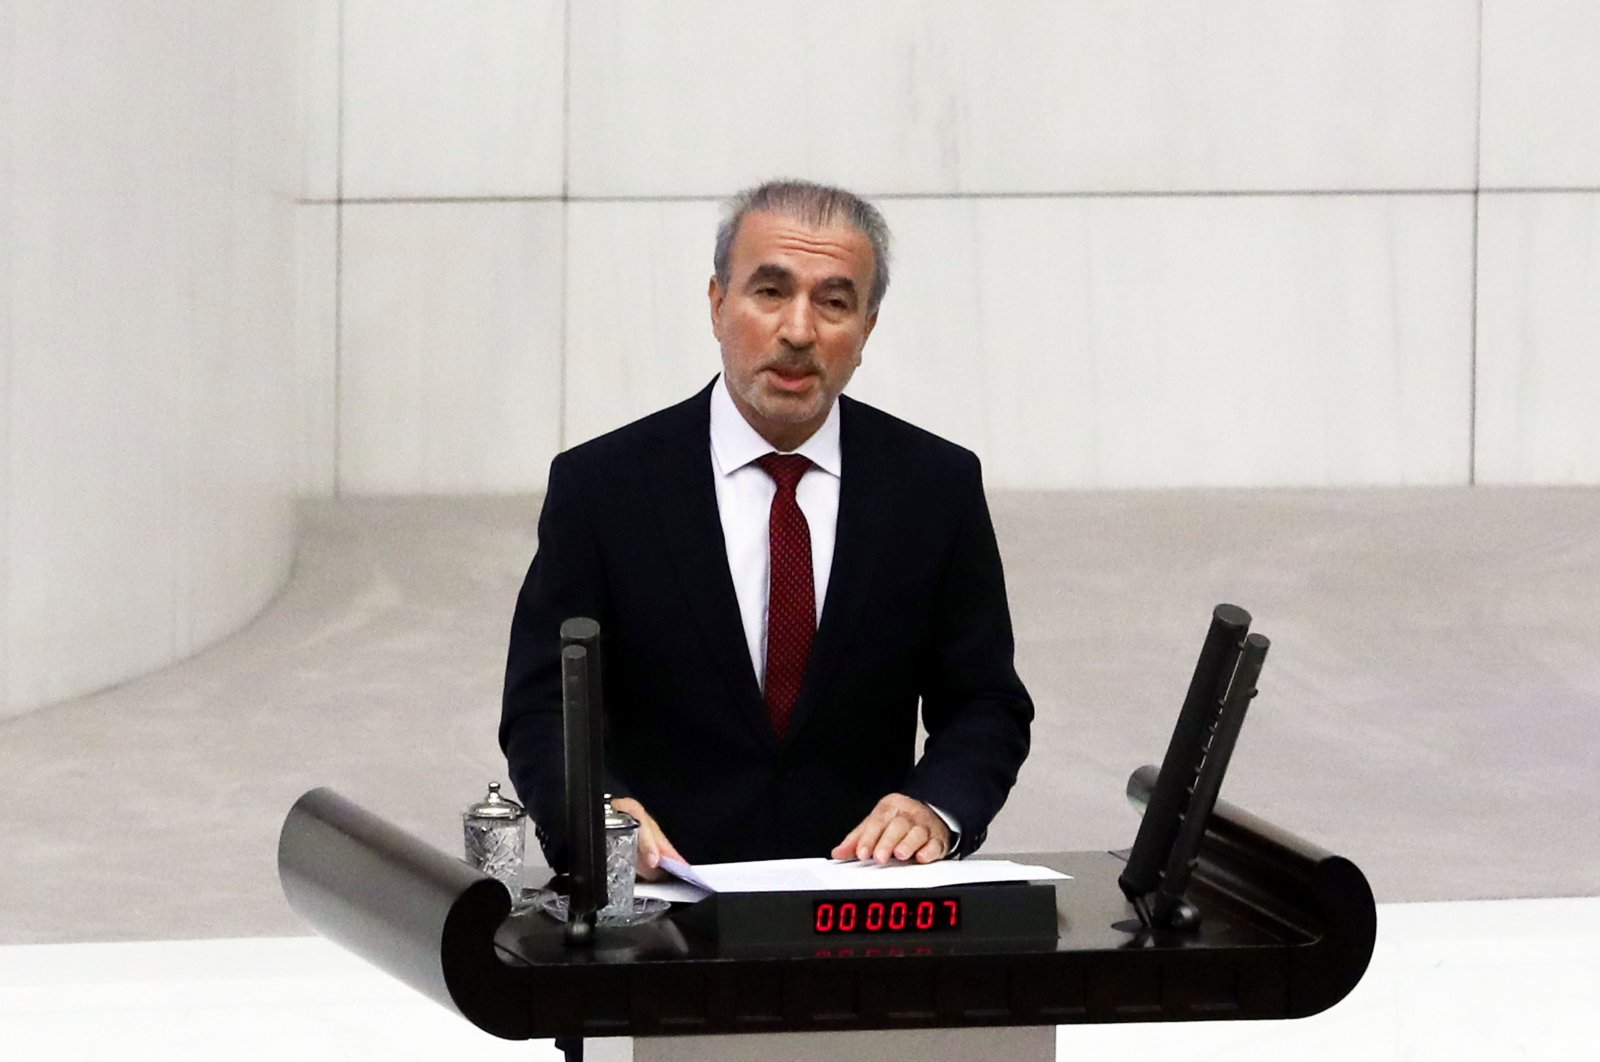 AK Party Group Deputy Chairperson Naci Bostancı speaks at the Turkish Parliament, in the capital Ankara, Turkey, April 23, 2019. (Sabah Photo)